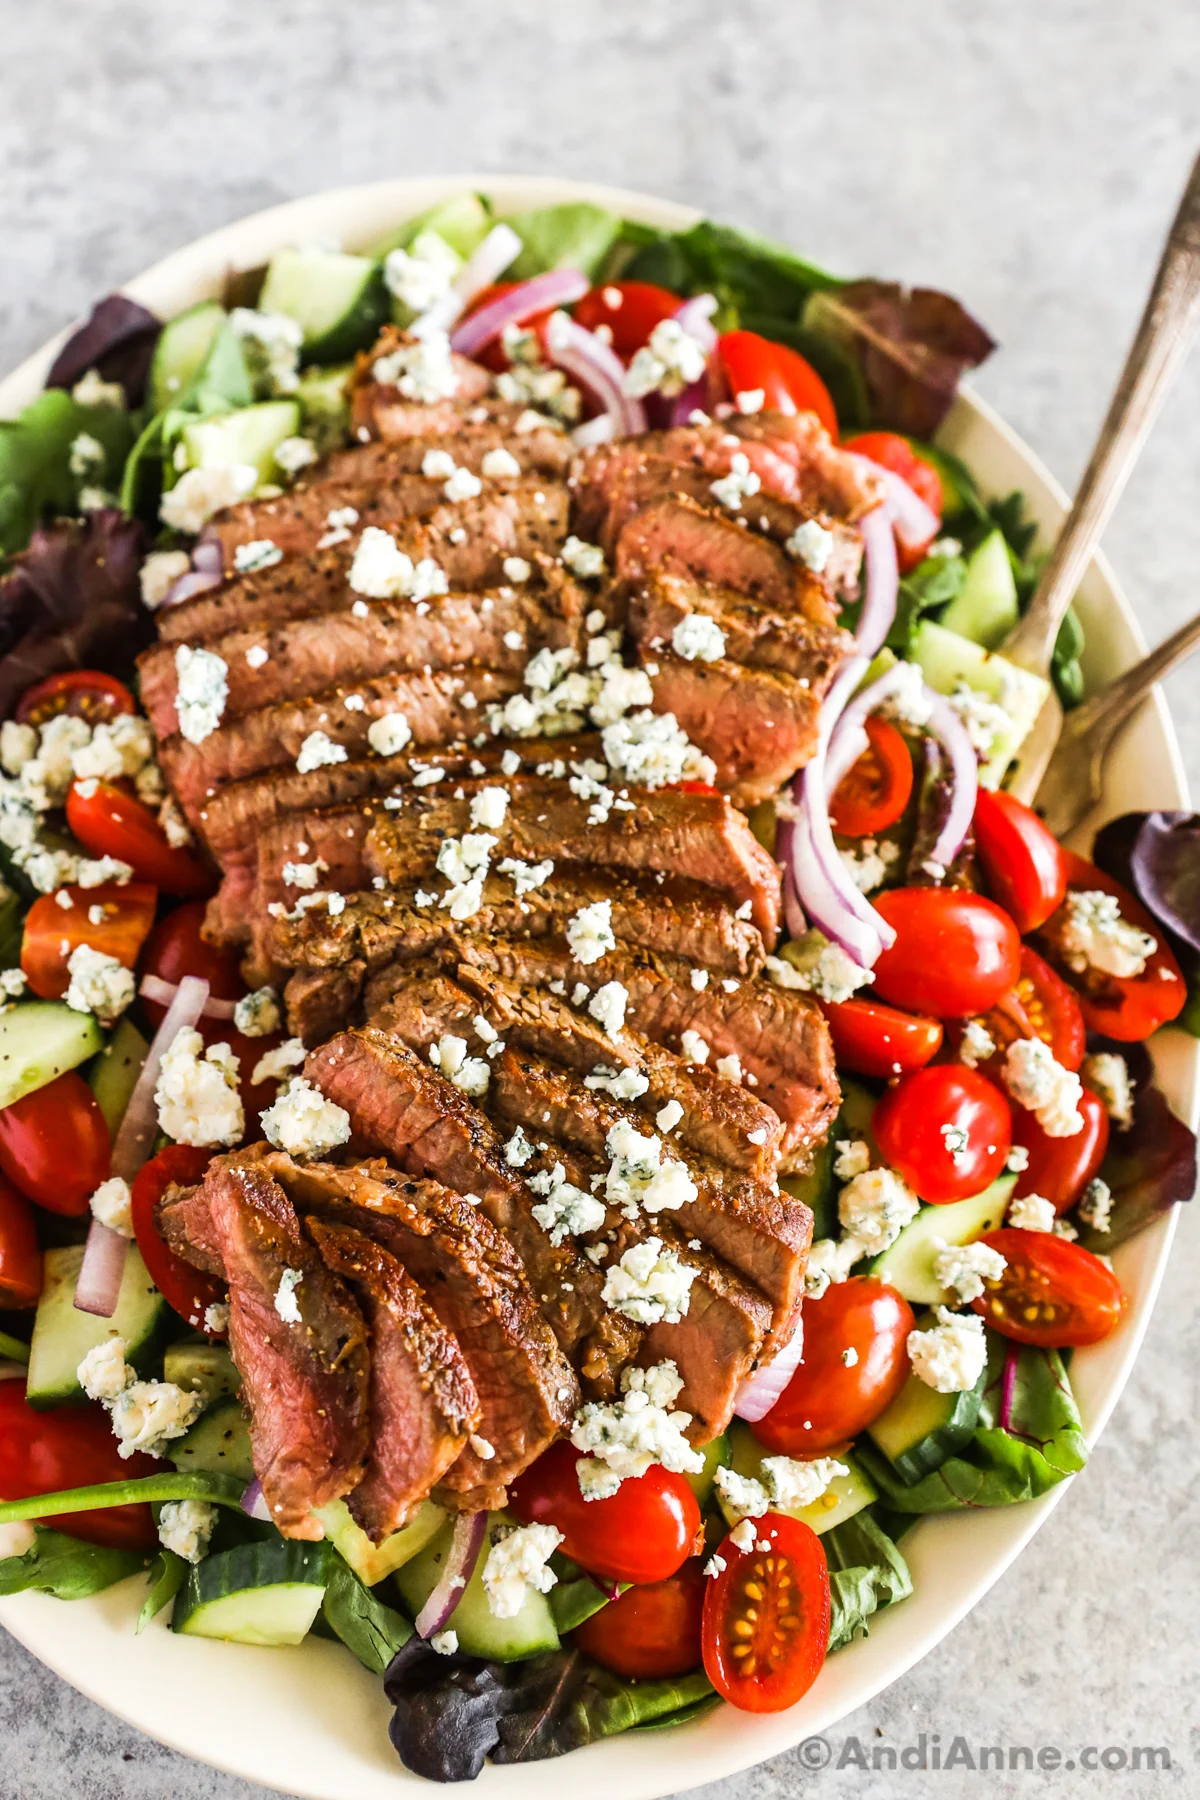 Steak salad recipe with crumbled feta on top of chopped vegetable salad.